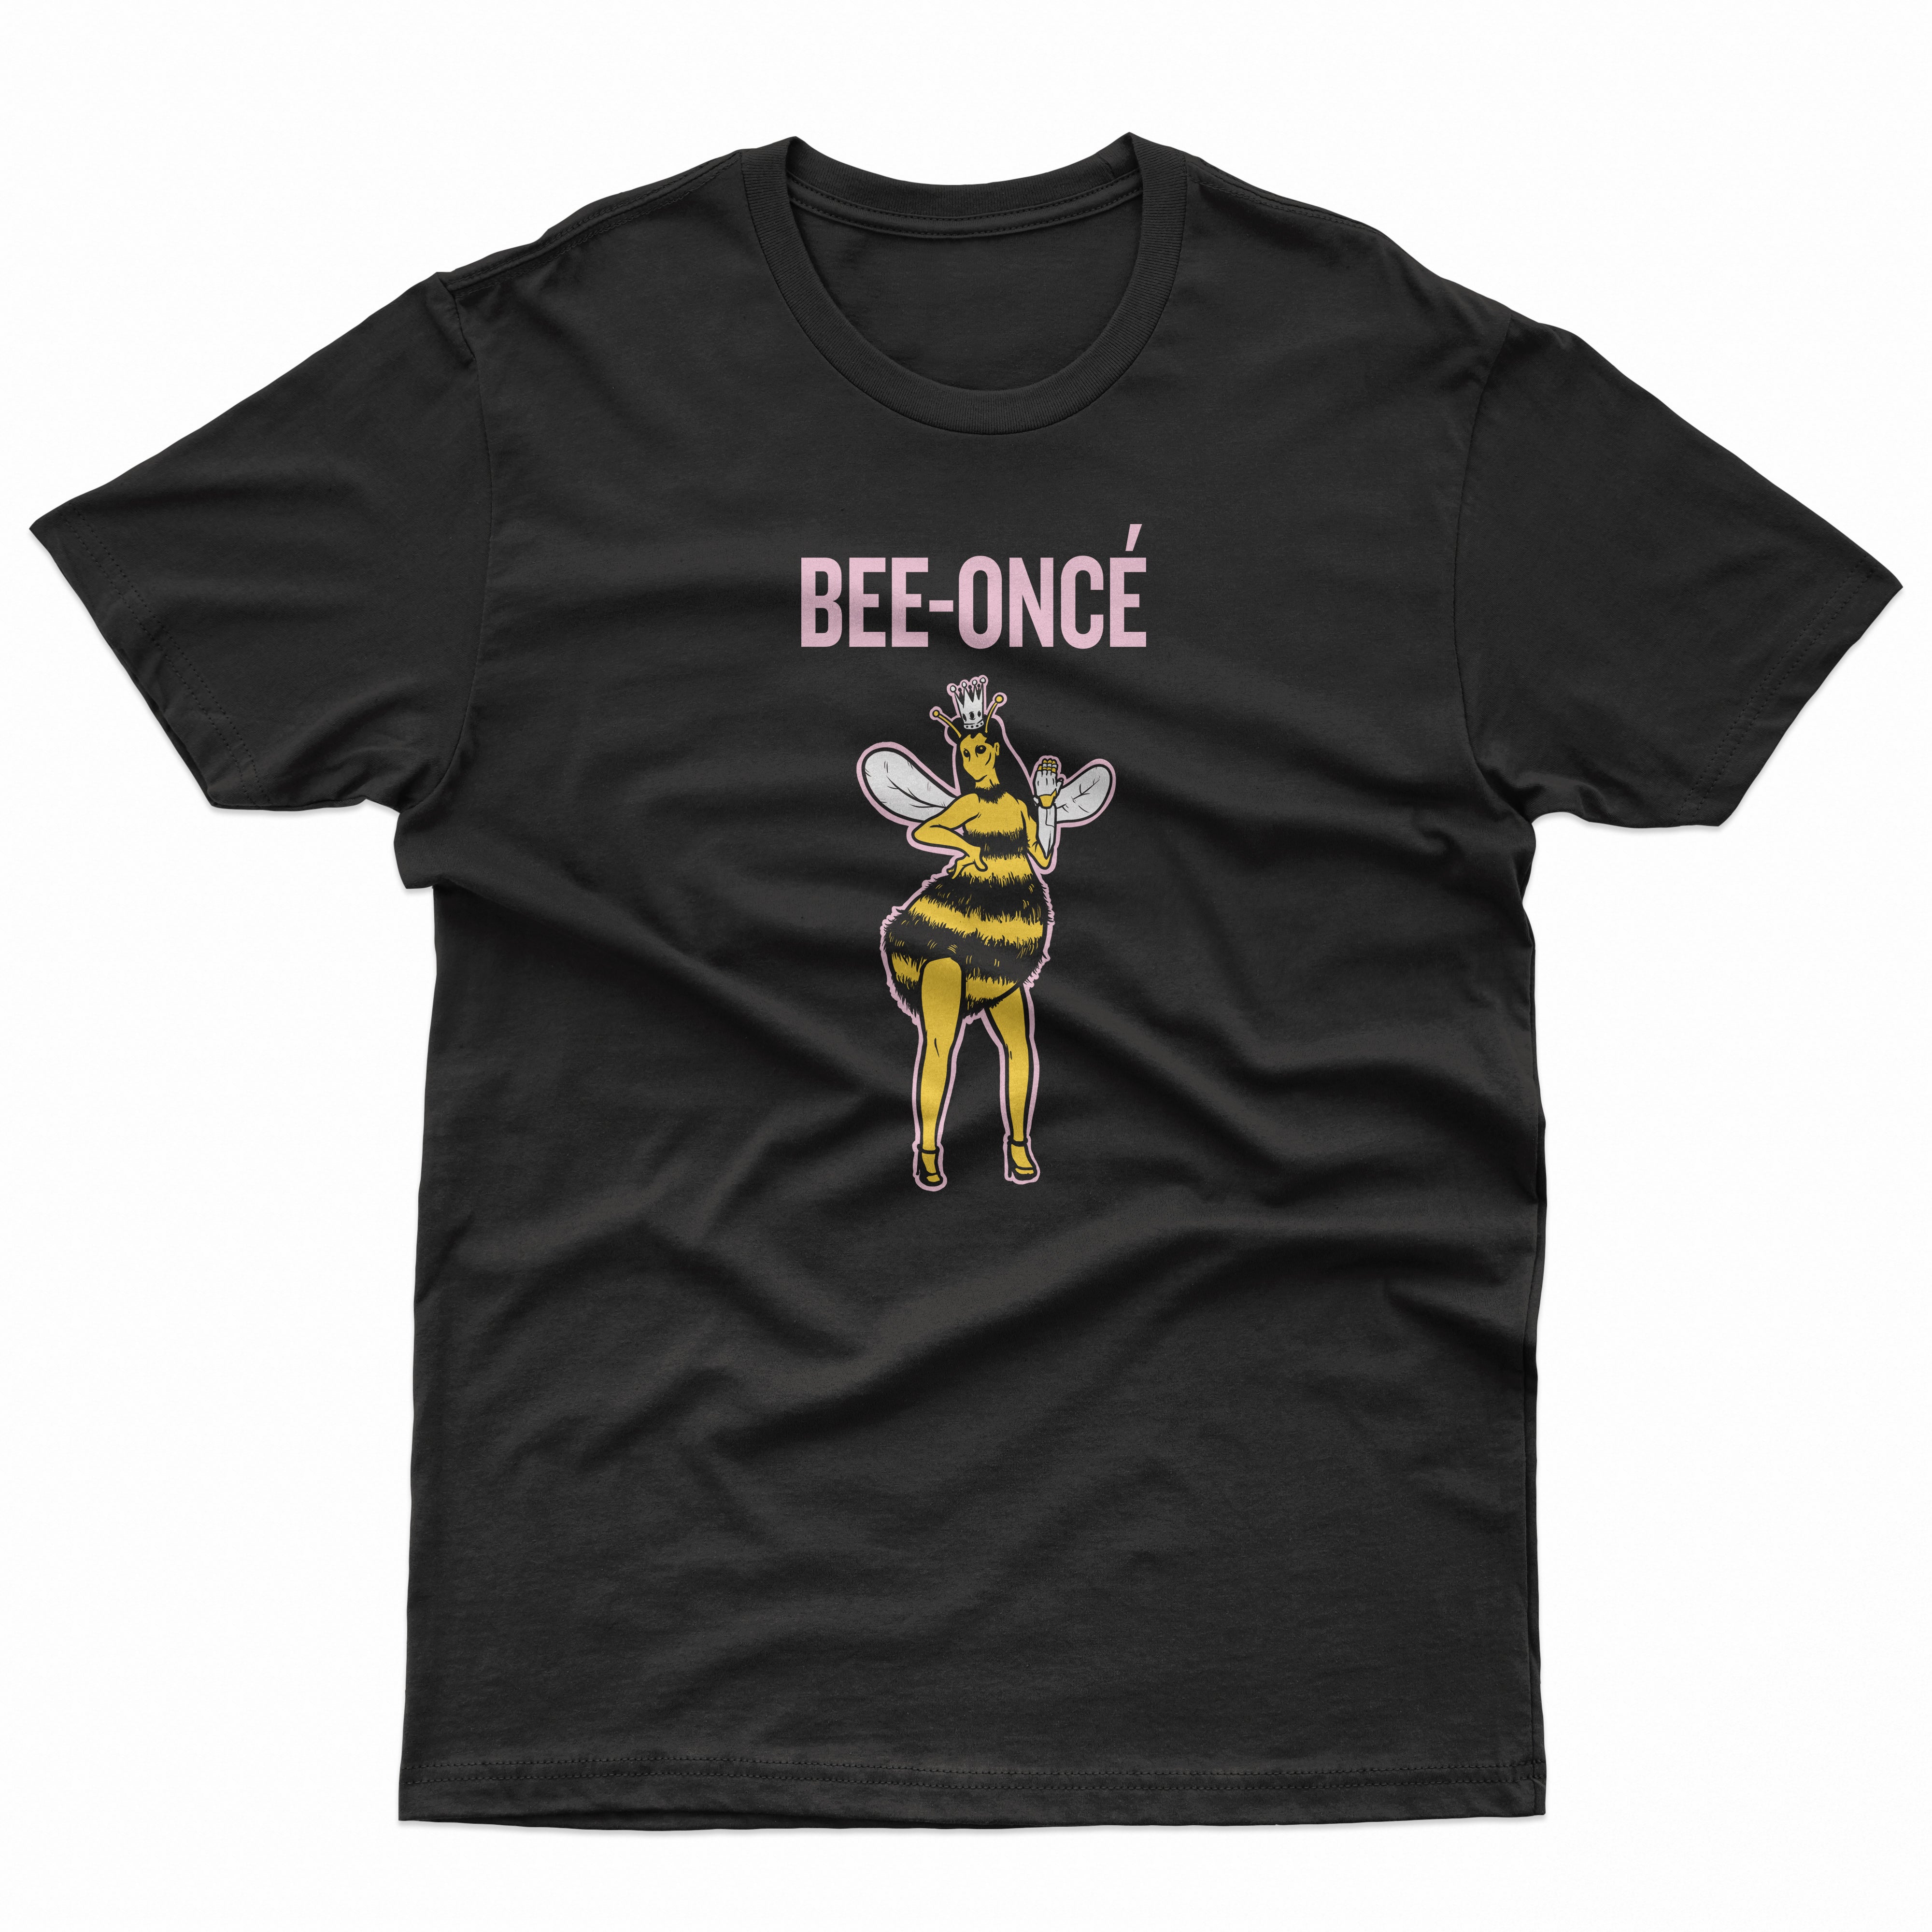 Bee-once T Shirt